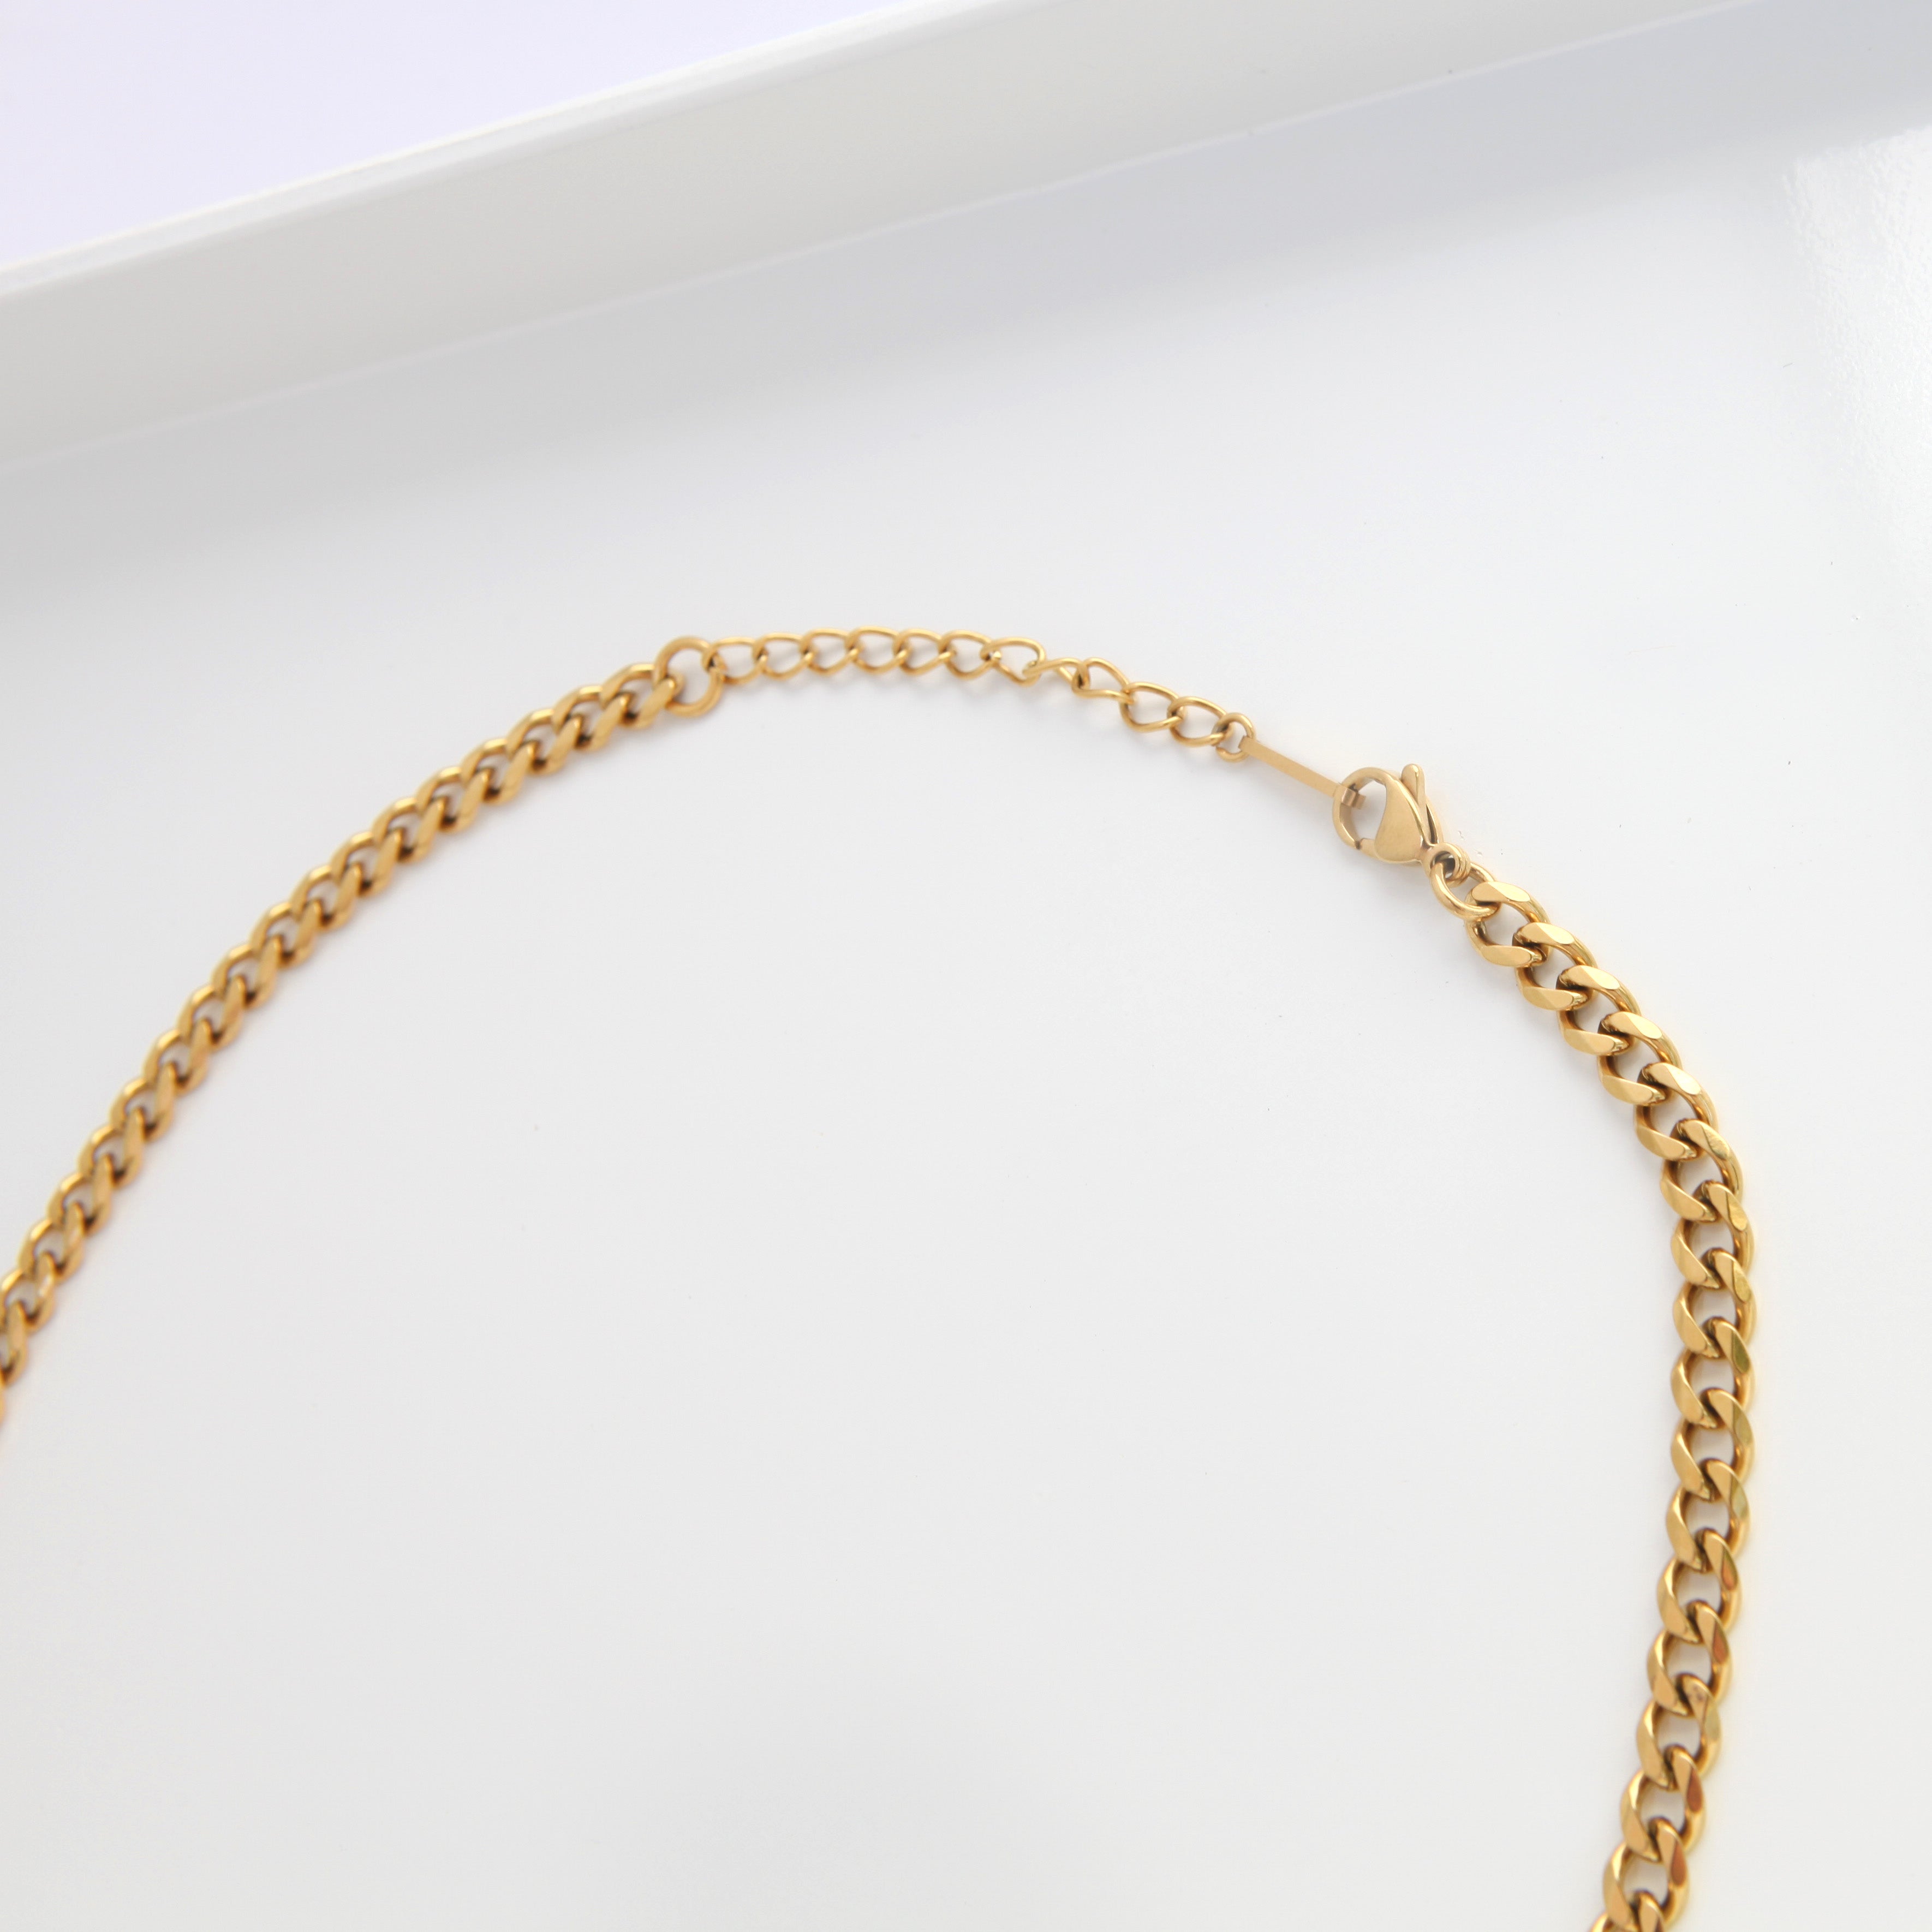 Cyprus - 18k Gold 6mm Cuban Chain Necklace